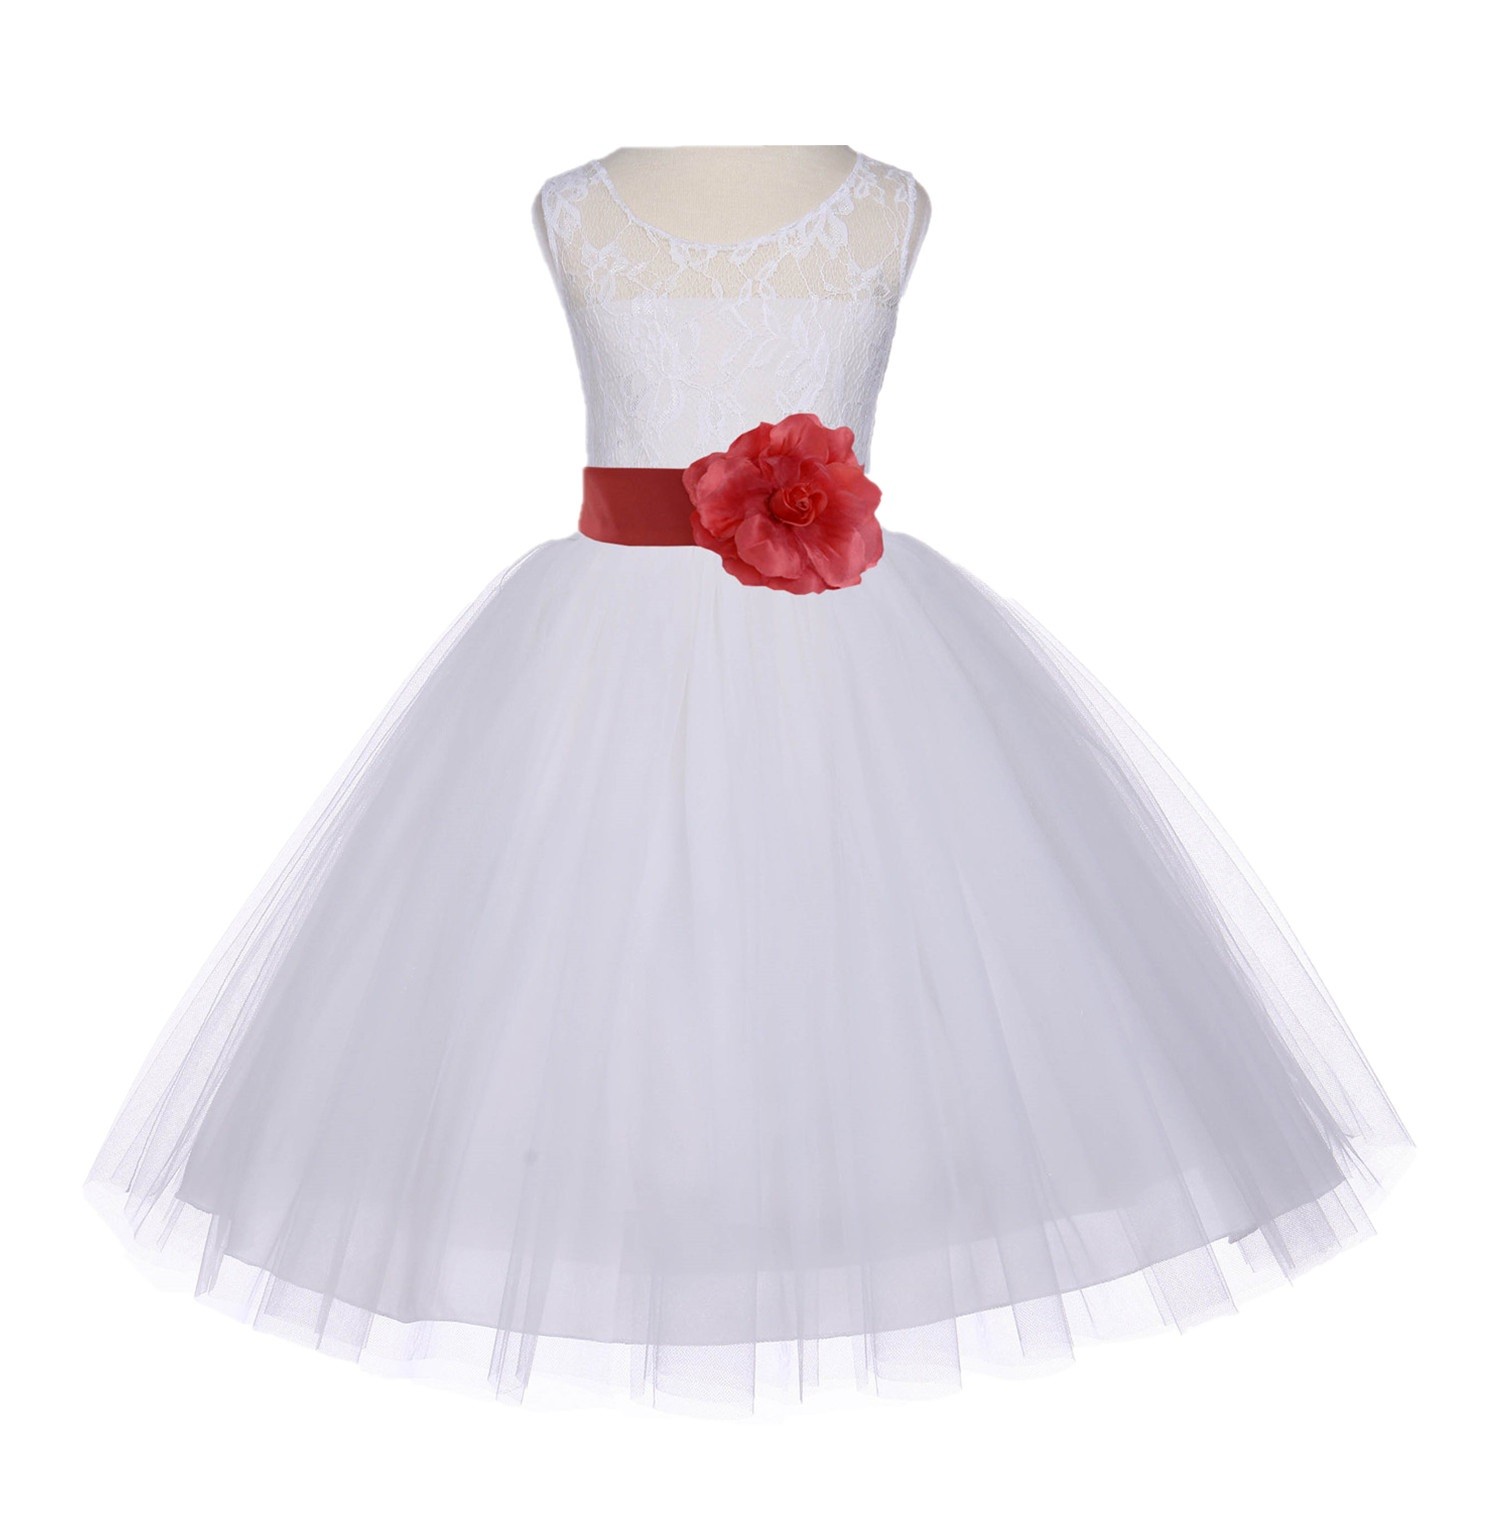 Ivory/Guava Floral Lace Bodice Tulle Flower Girl Dress Bridesmaid 153S